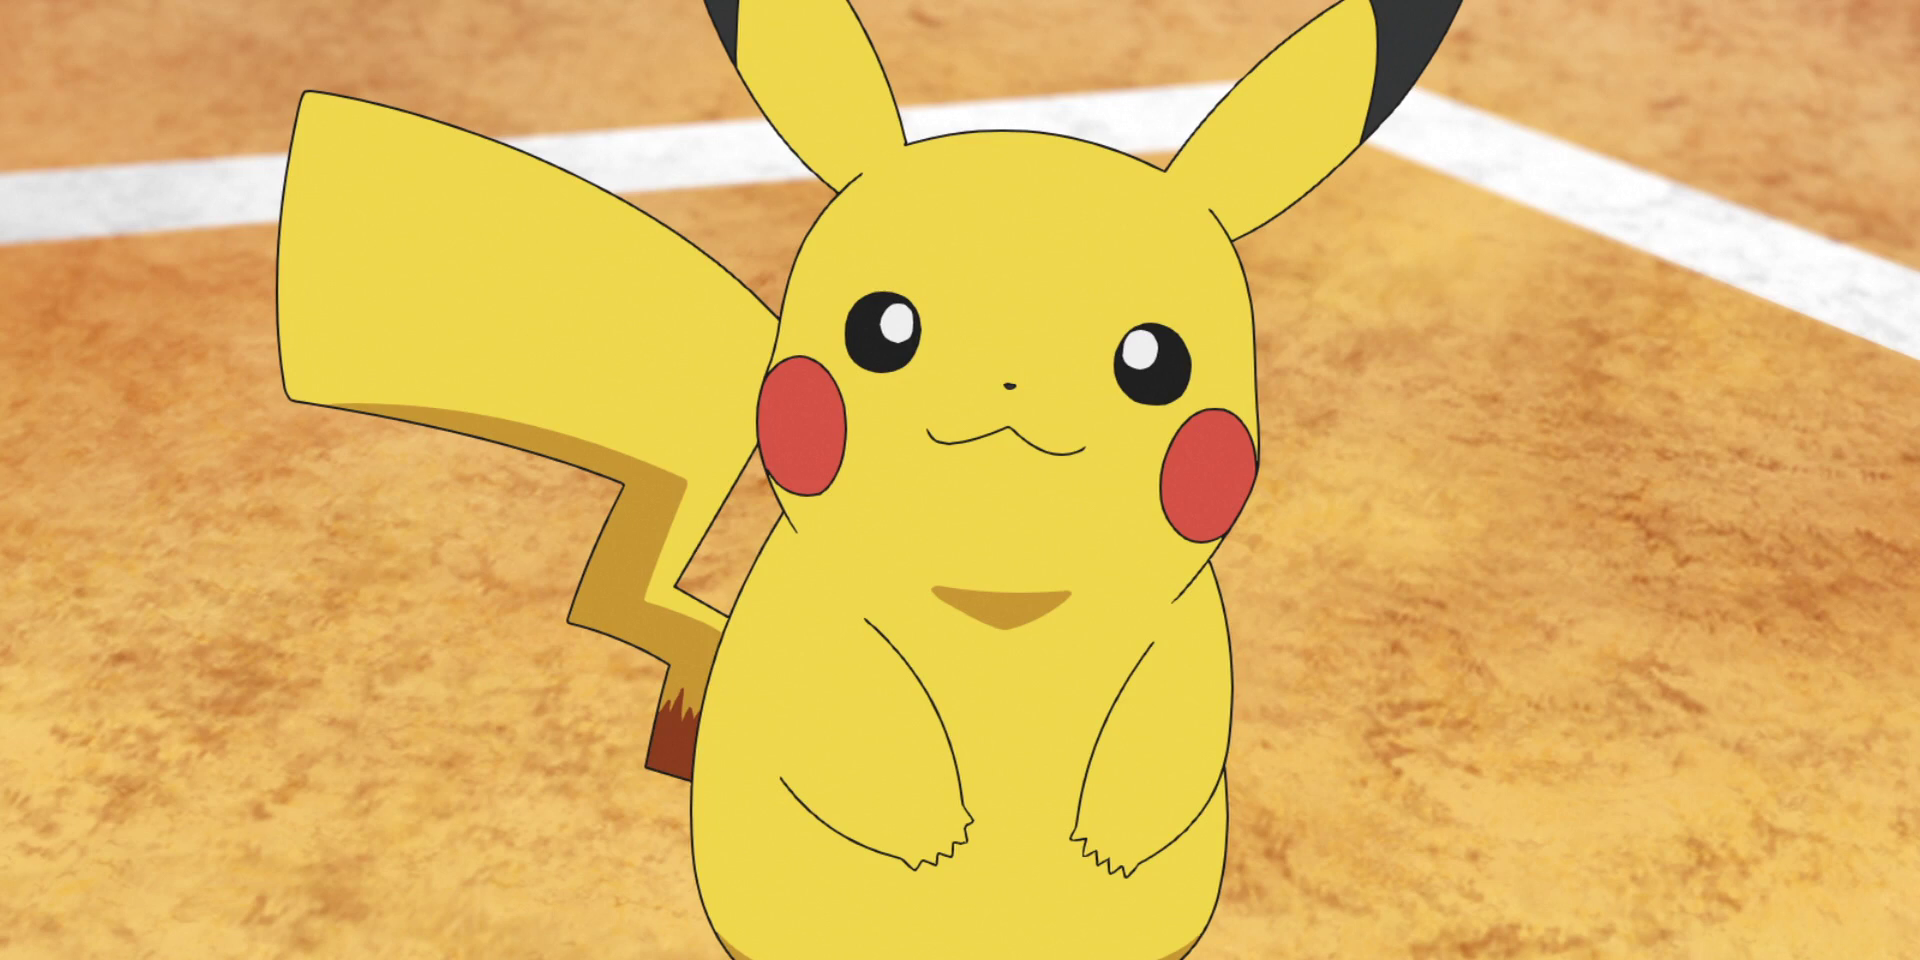 Pikachu from the Pokemon series